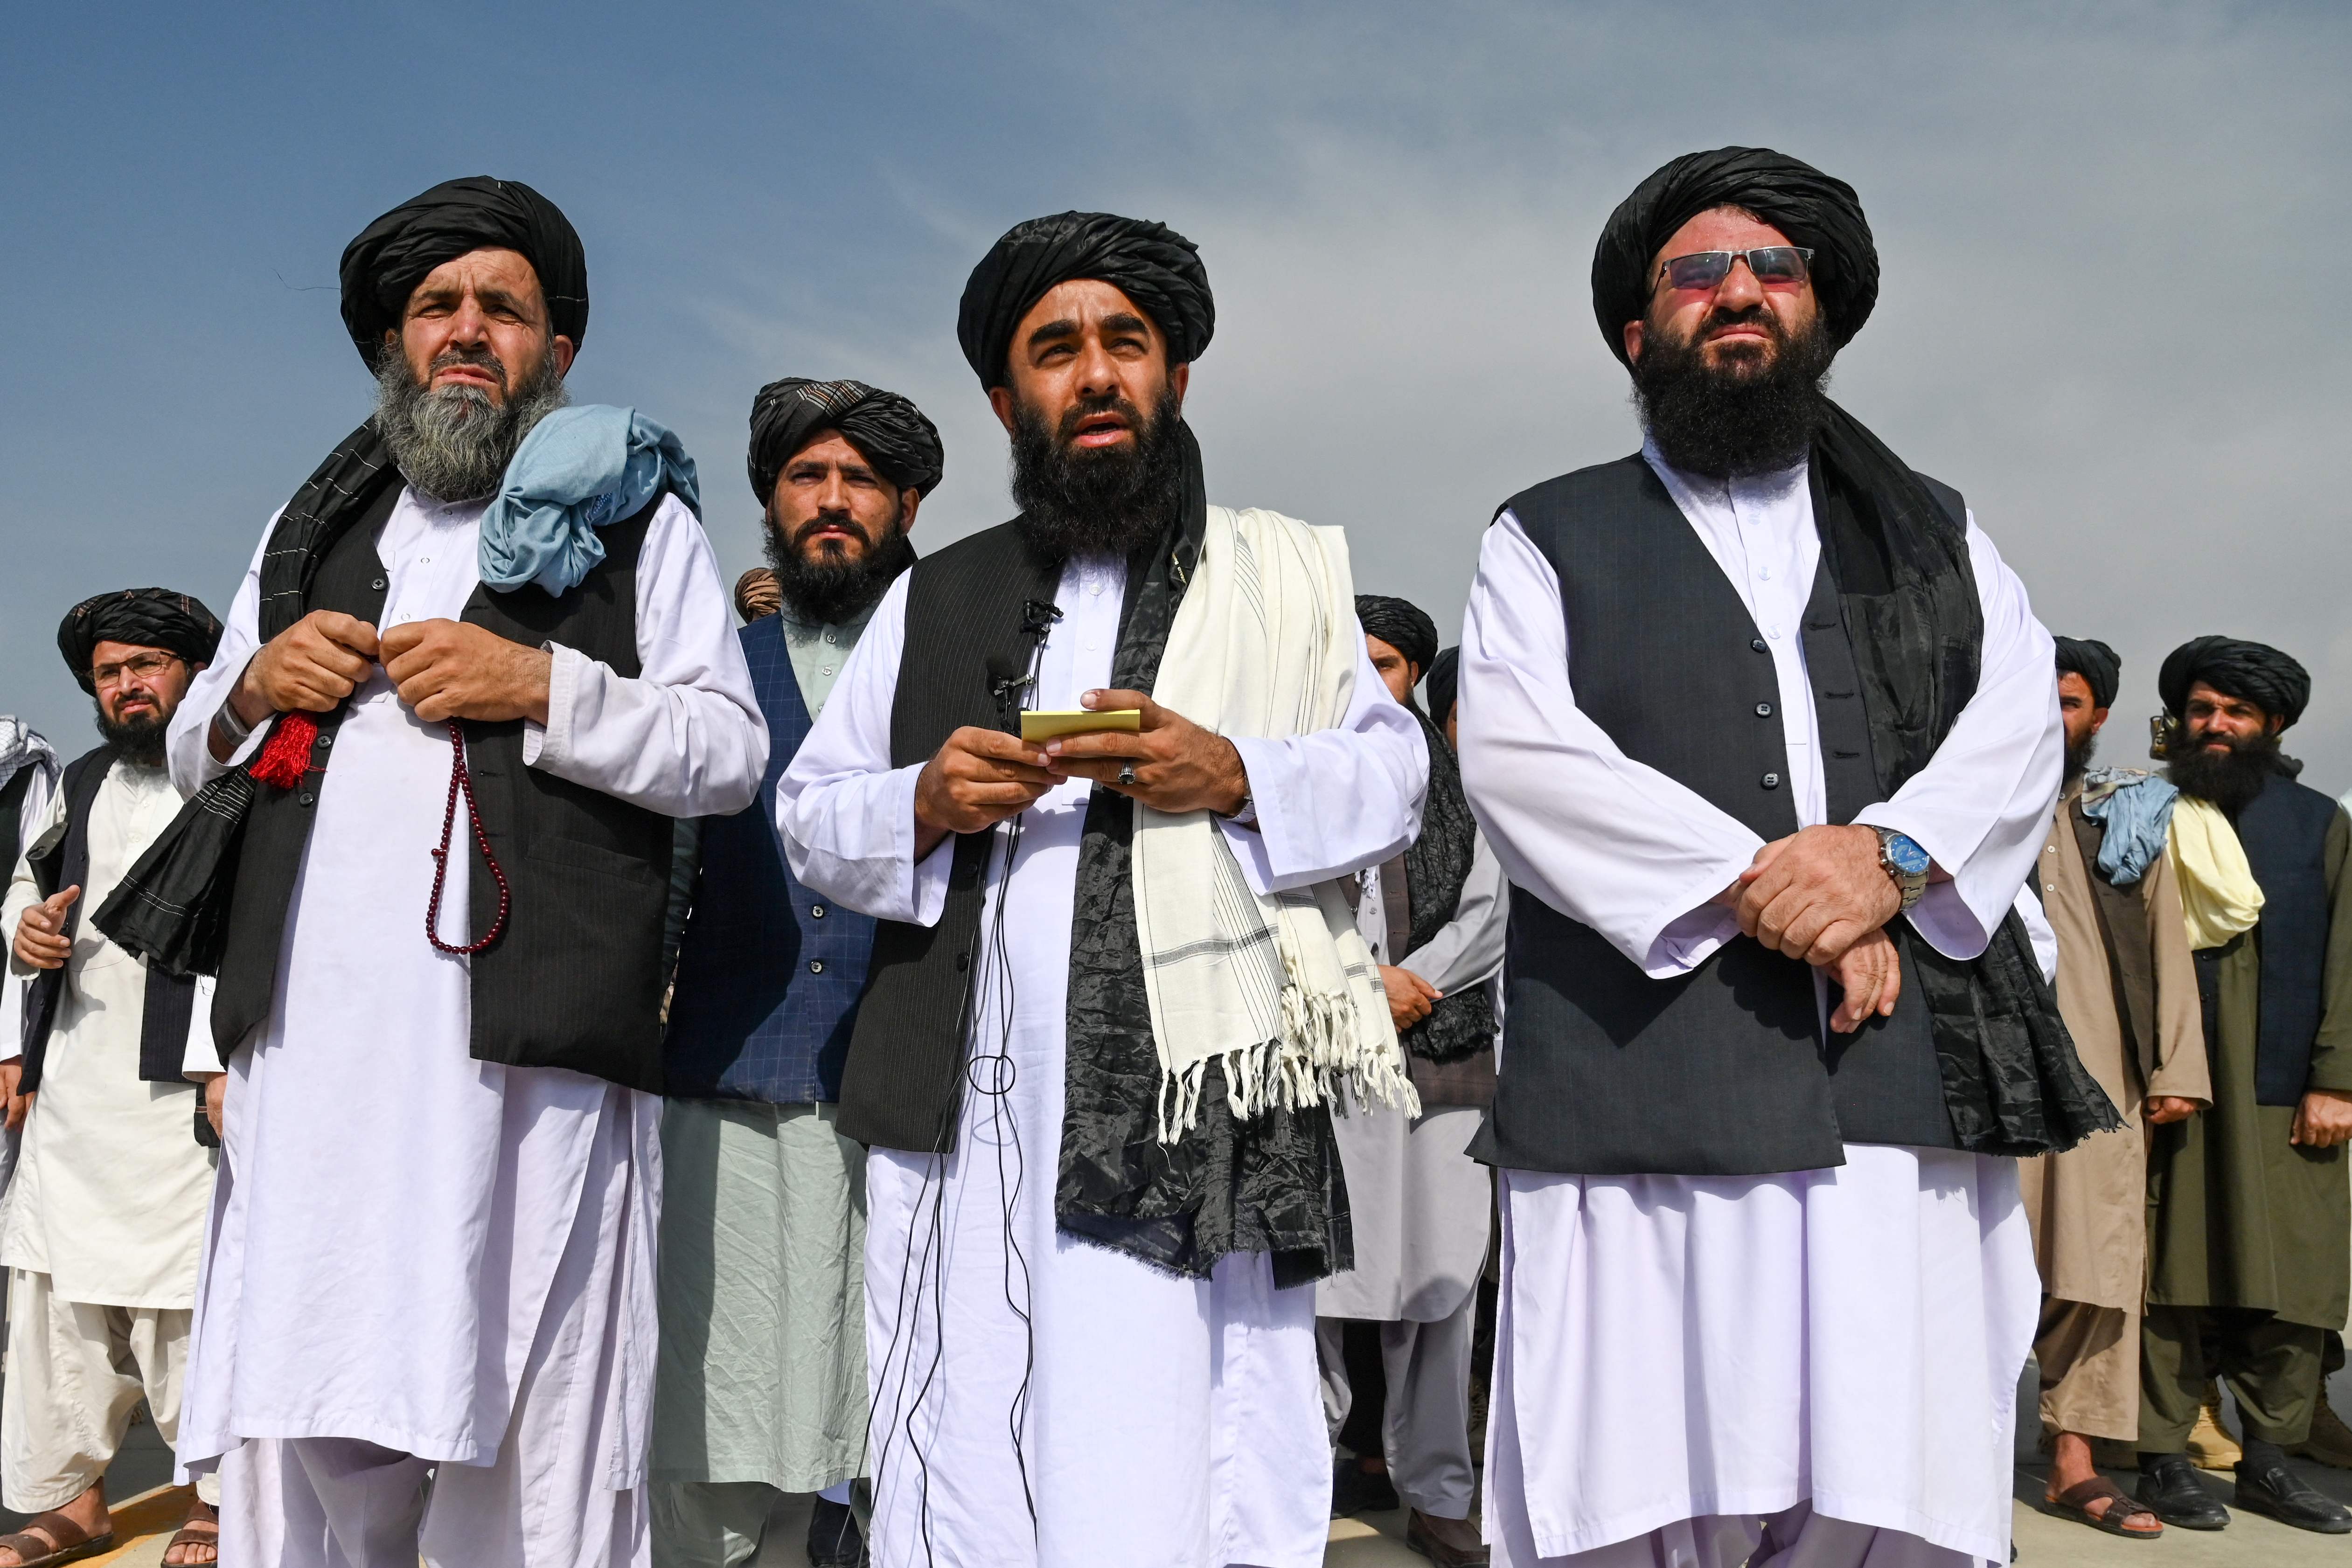 Taliban spokesperson Zabihullah Mujahid (centre) speaks to the media at the airport in Kabul after the US withdrawal